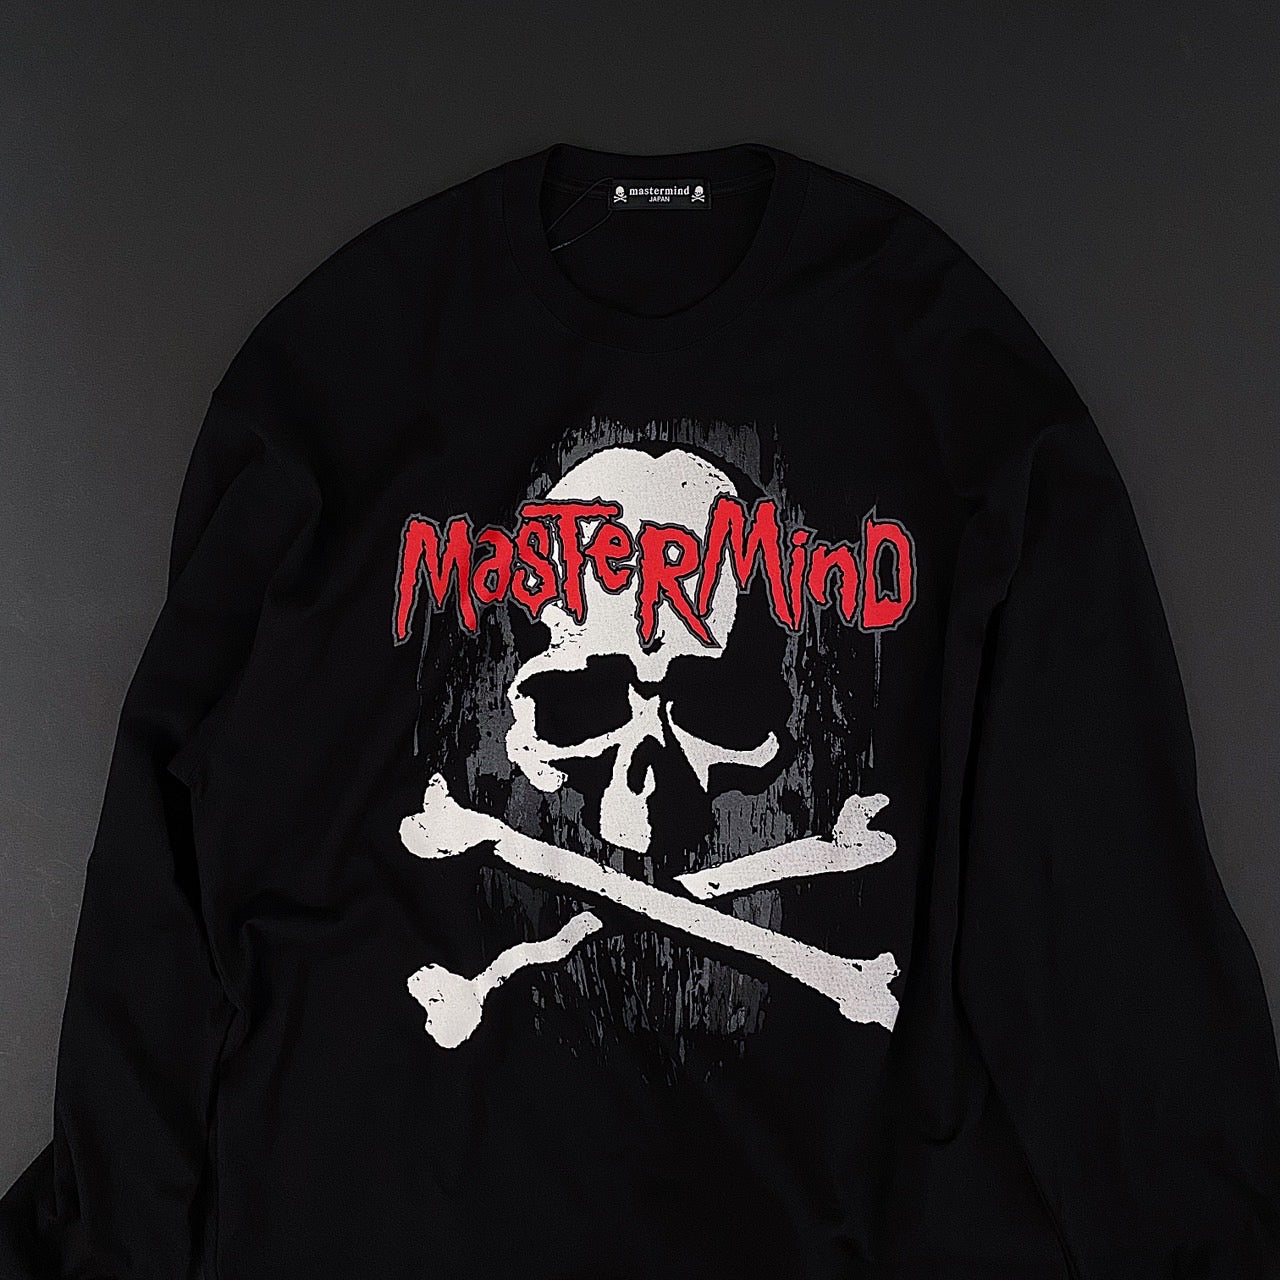 【MASTERMIND】<br> The 23AW collection will be on sale online tomorrow, 7/30 (Sun) at 10:00!